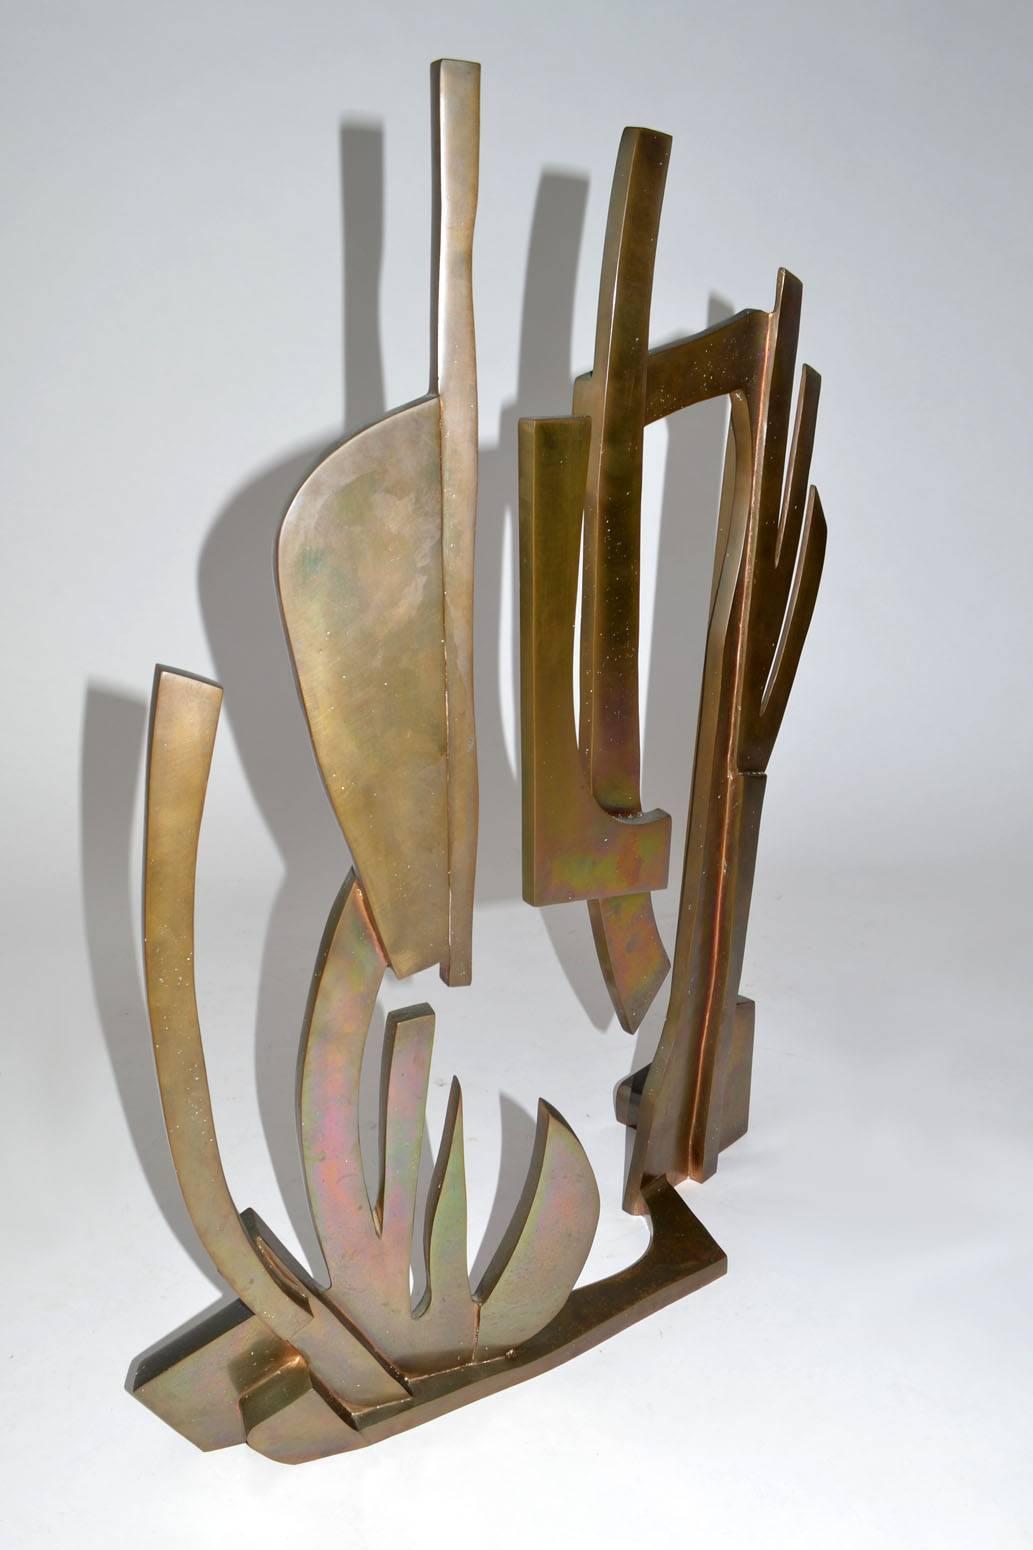 American Modern Abstract Bronze Sculpture by Oded Halahmy, New York, 1977